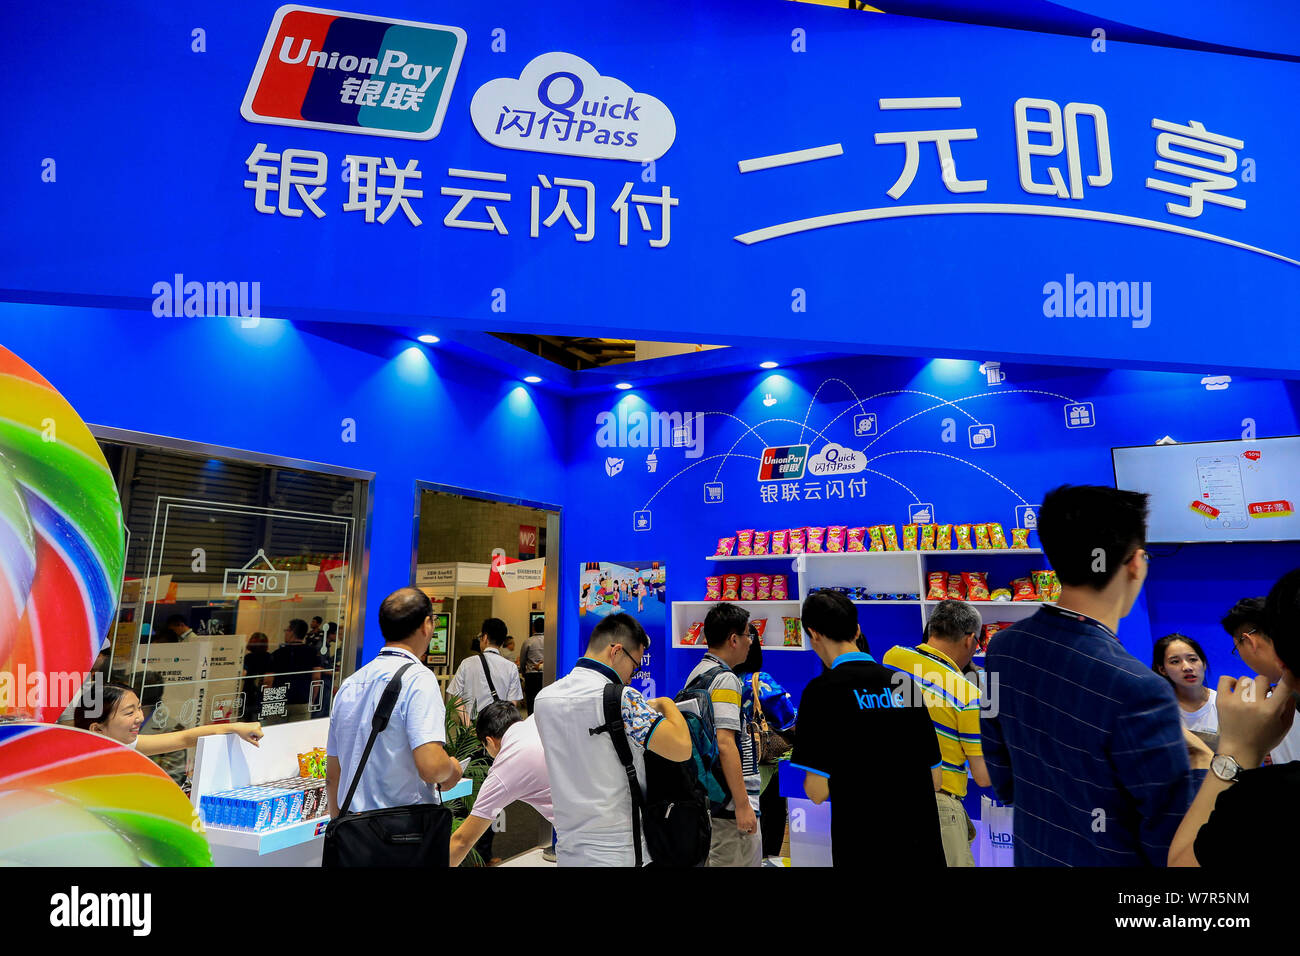 Visitors crowd the stand of China UnionPay during the 2017 Mobile World Congress (MWC) in Shanghai, China, 28 June 2017.   The Mobile World Congress 2 Stock Photo